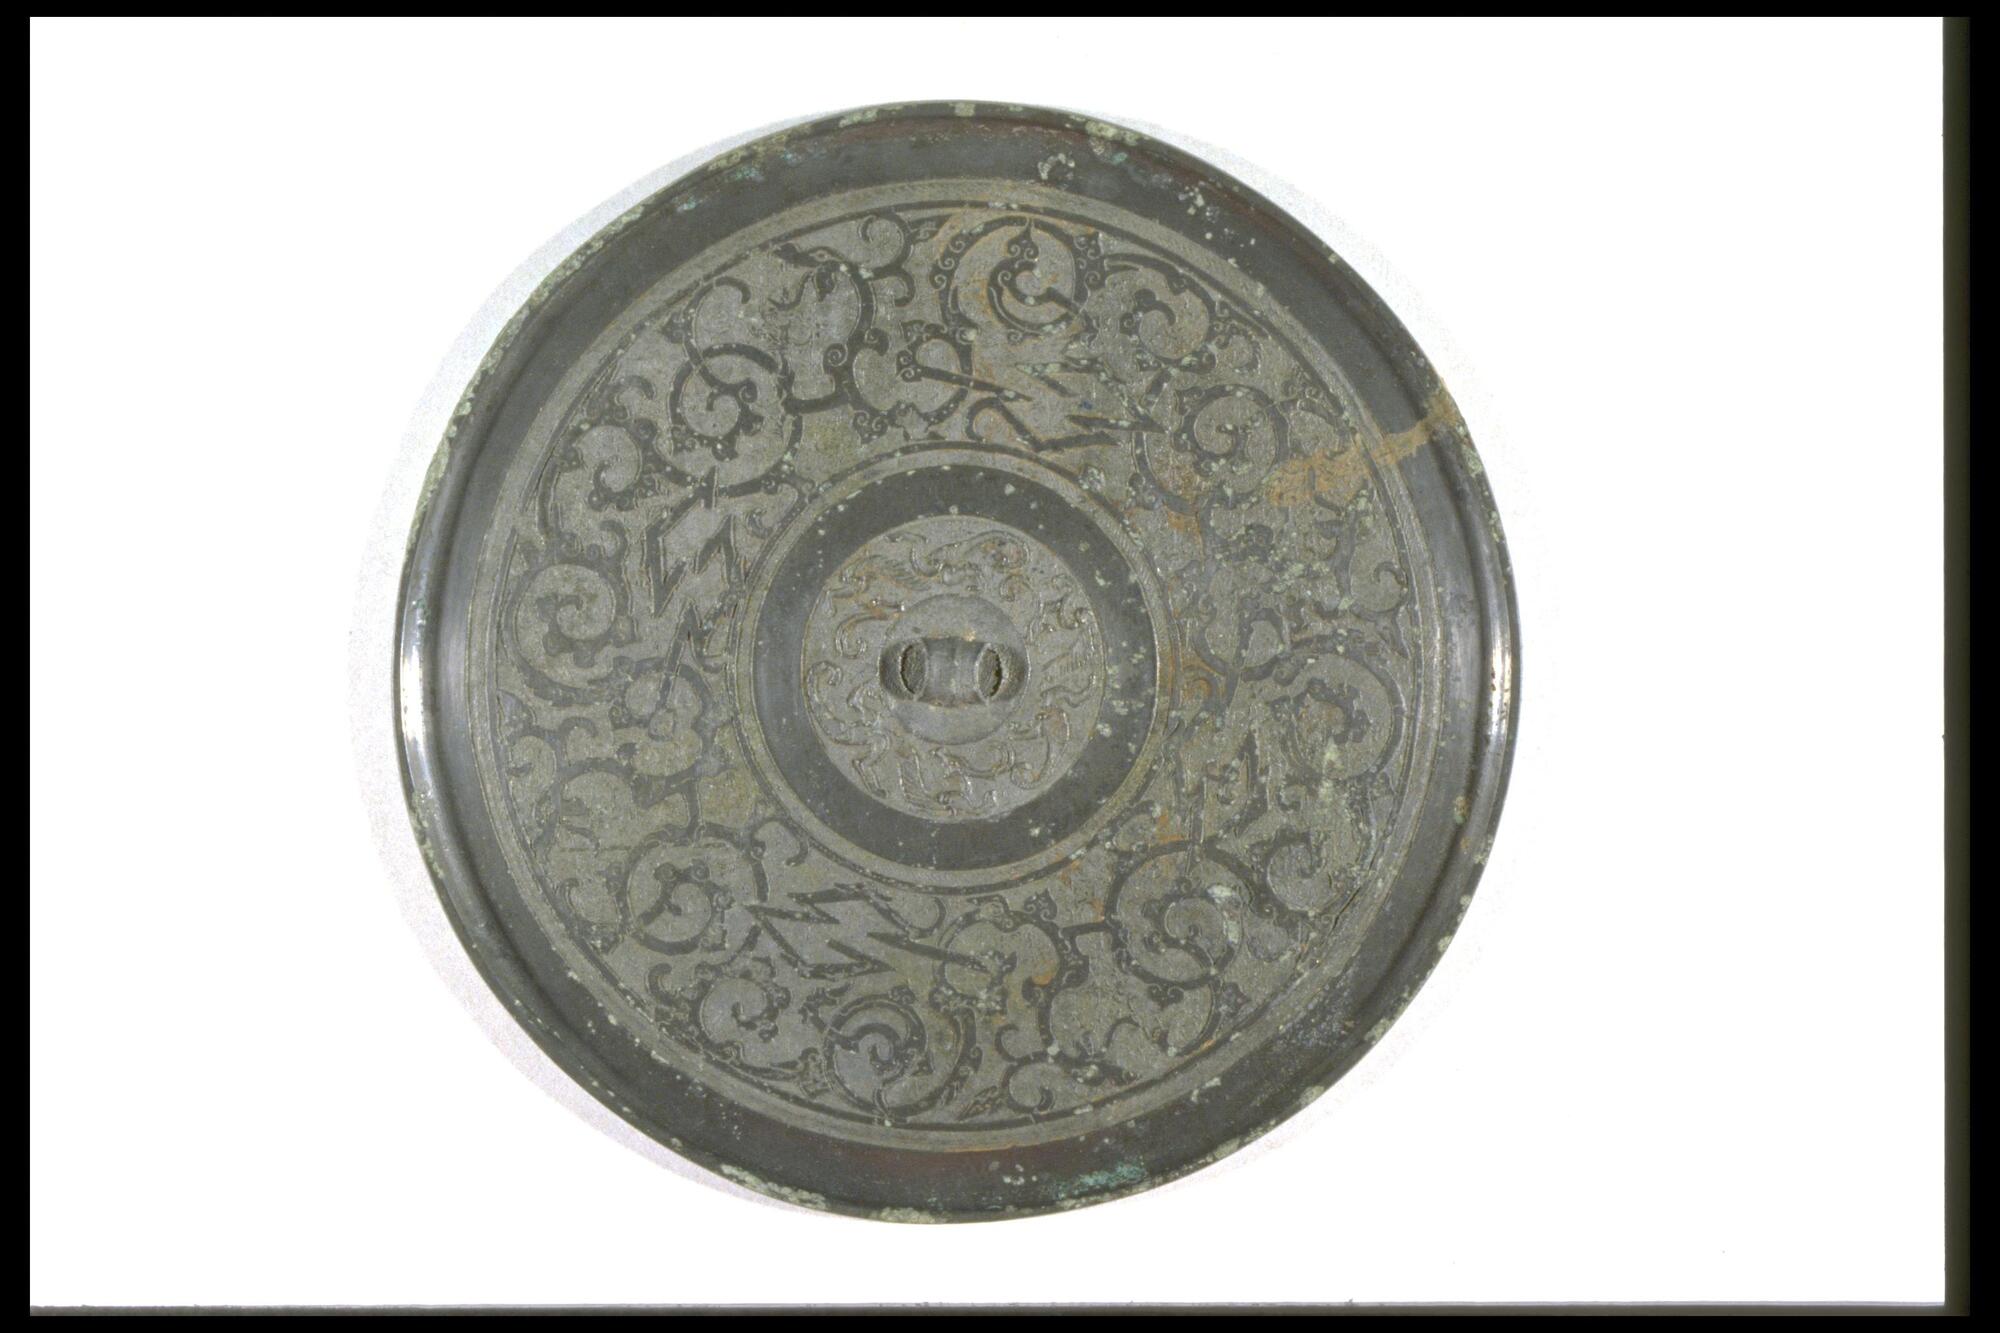 Thinnly cast mirror with narrow rim and bridge-shaped knob, back decorated with interlaces of serpentine and angular meaders, front side polished flat